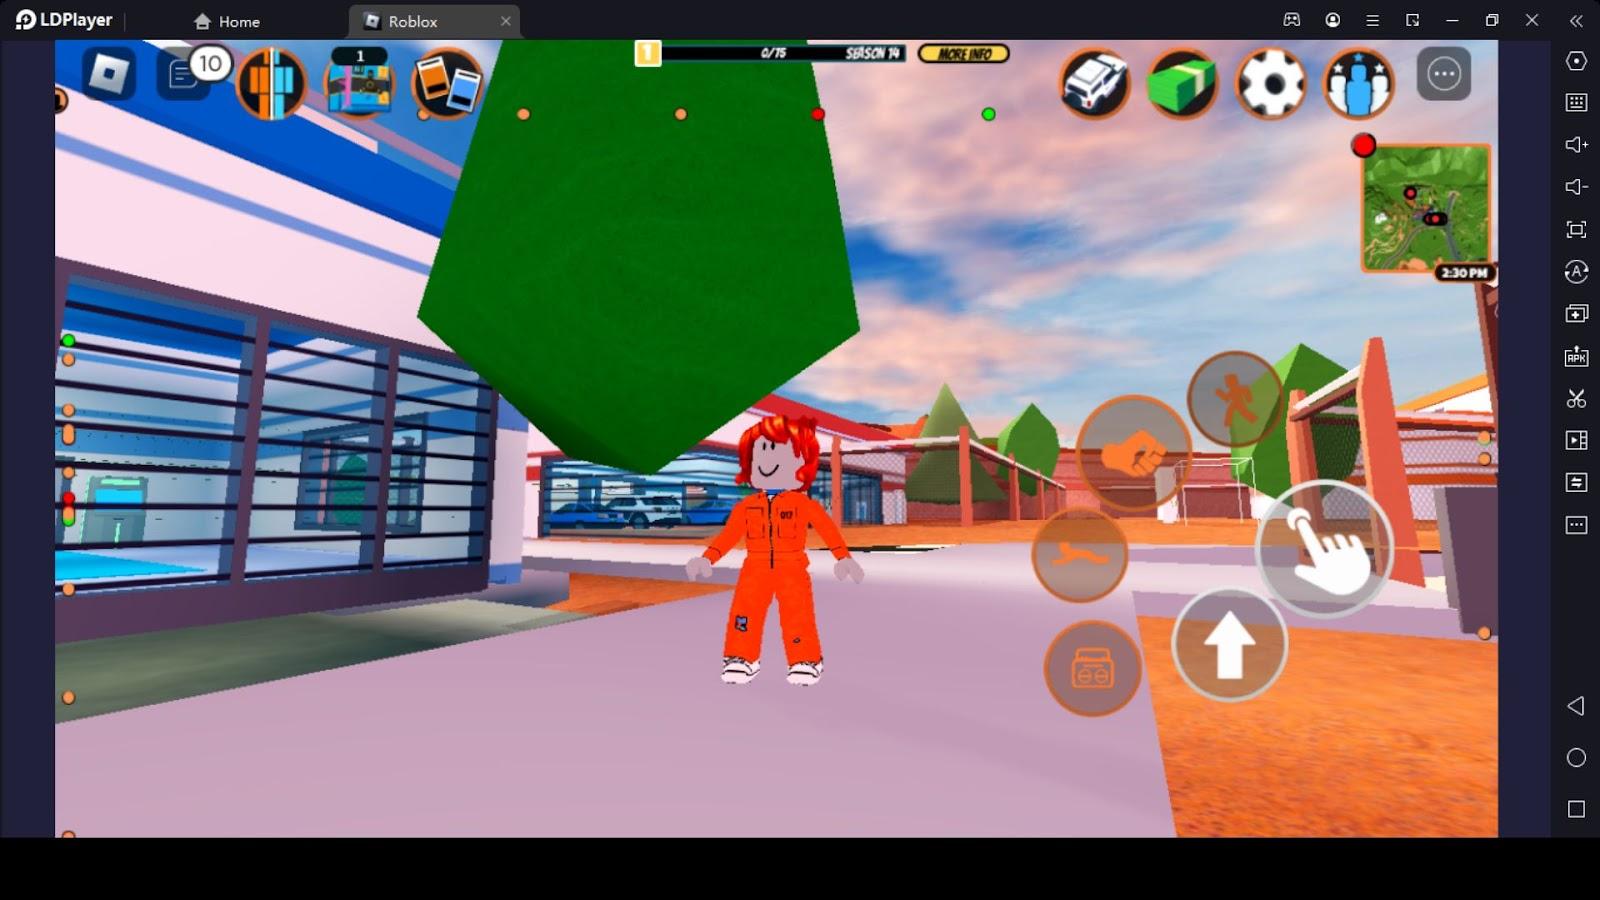 Roblox Jailbreak tips: How to master virtual cops and robbers